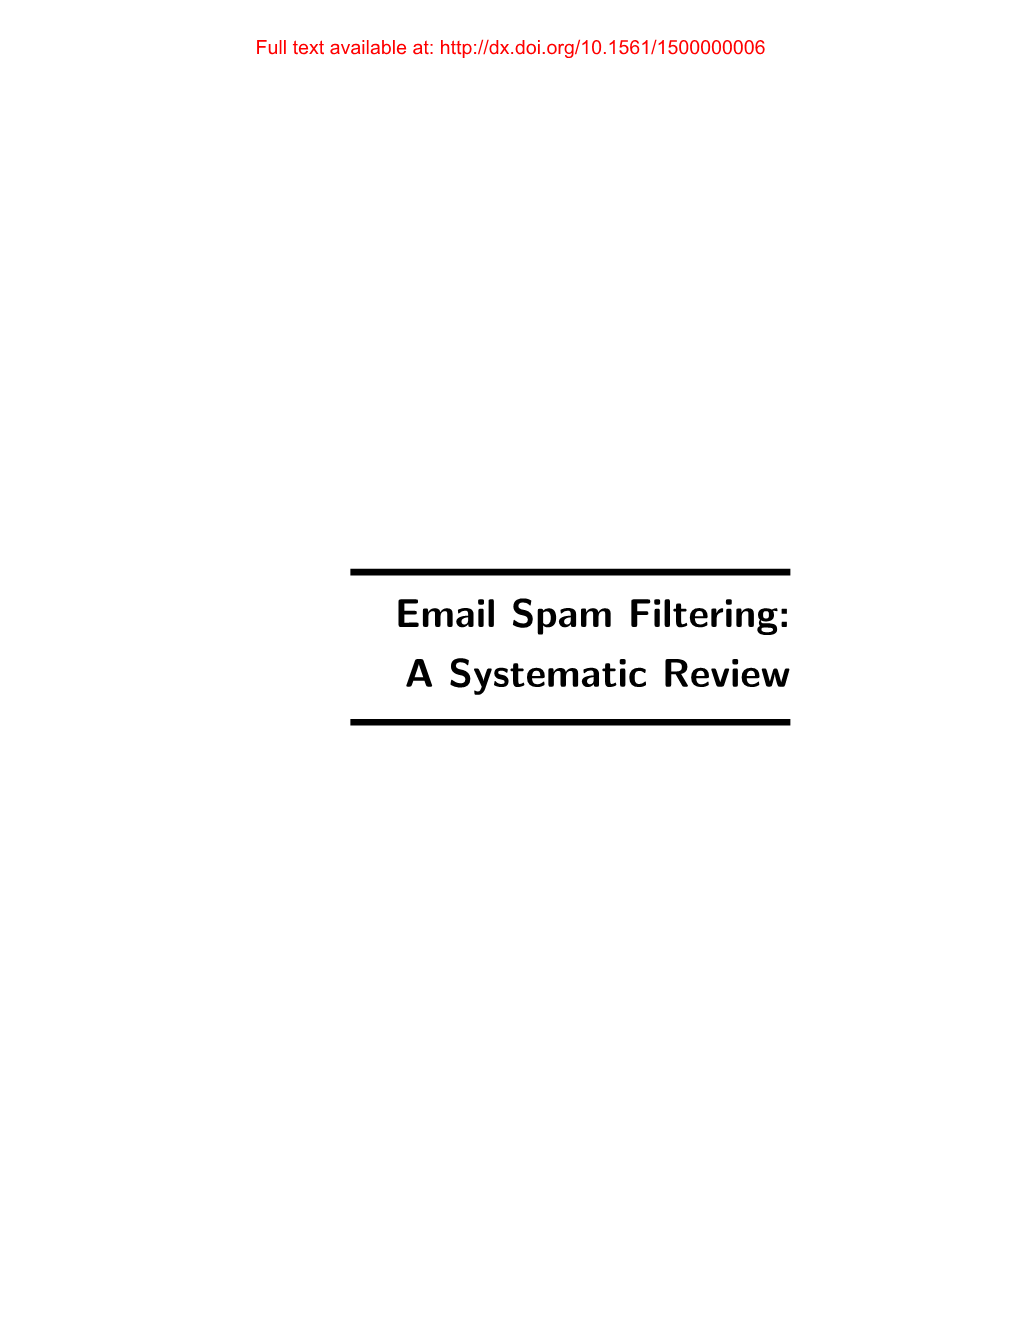 Email Spam Filtering: a Systematic Review Full Text Available At